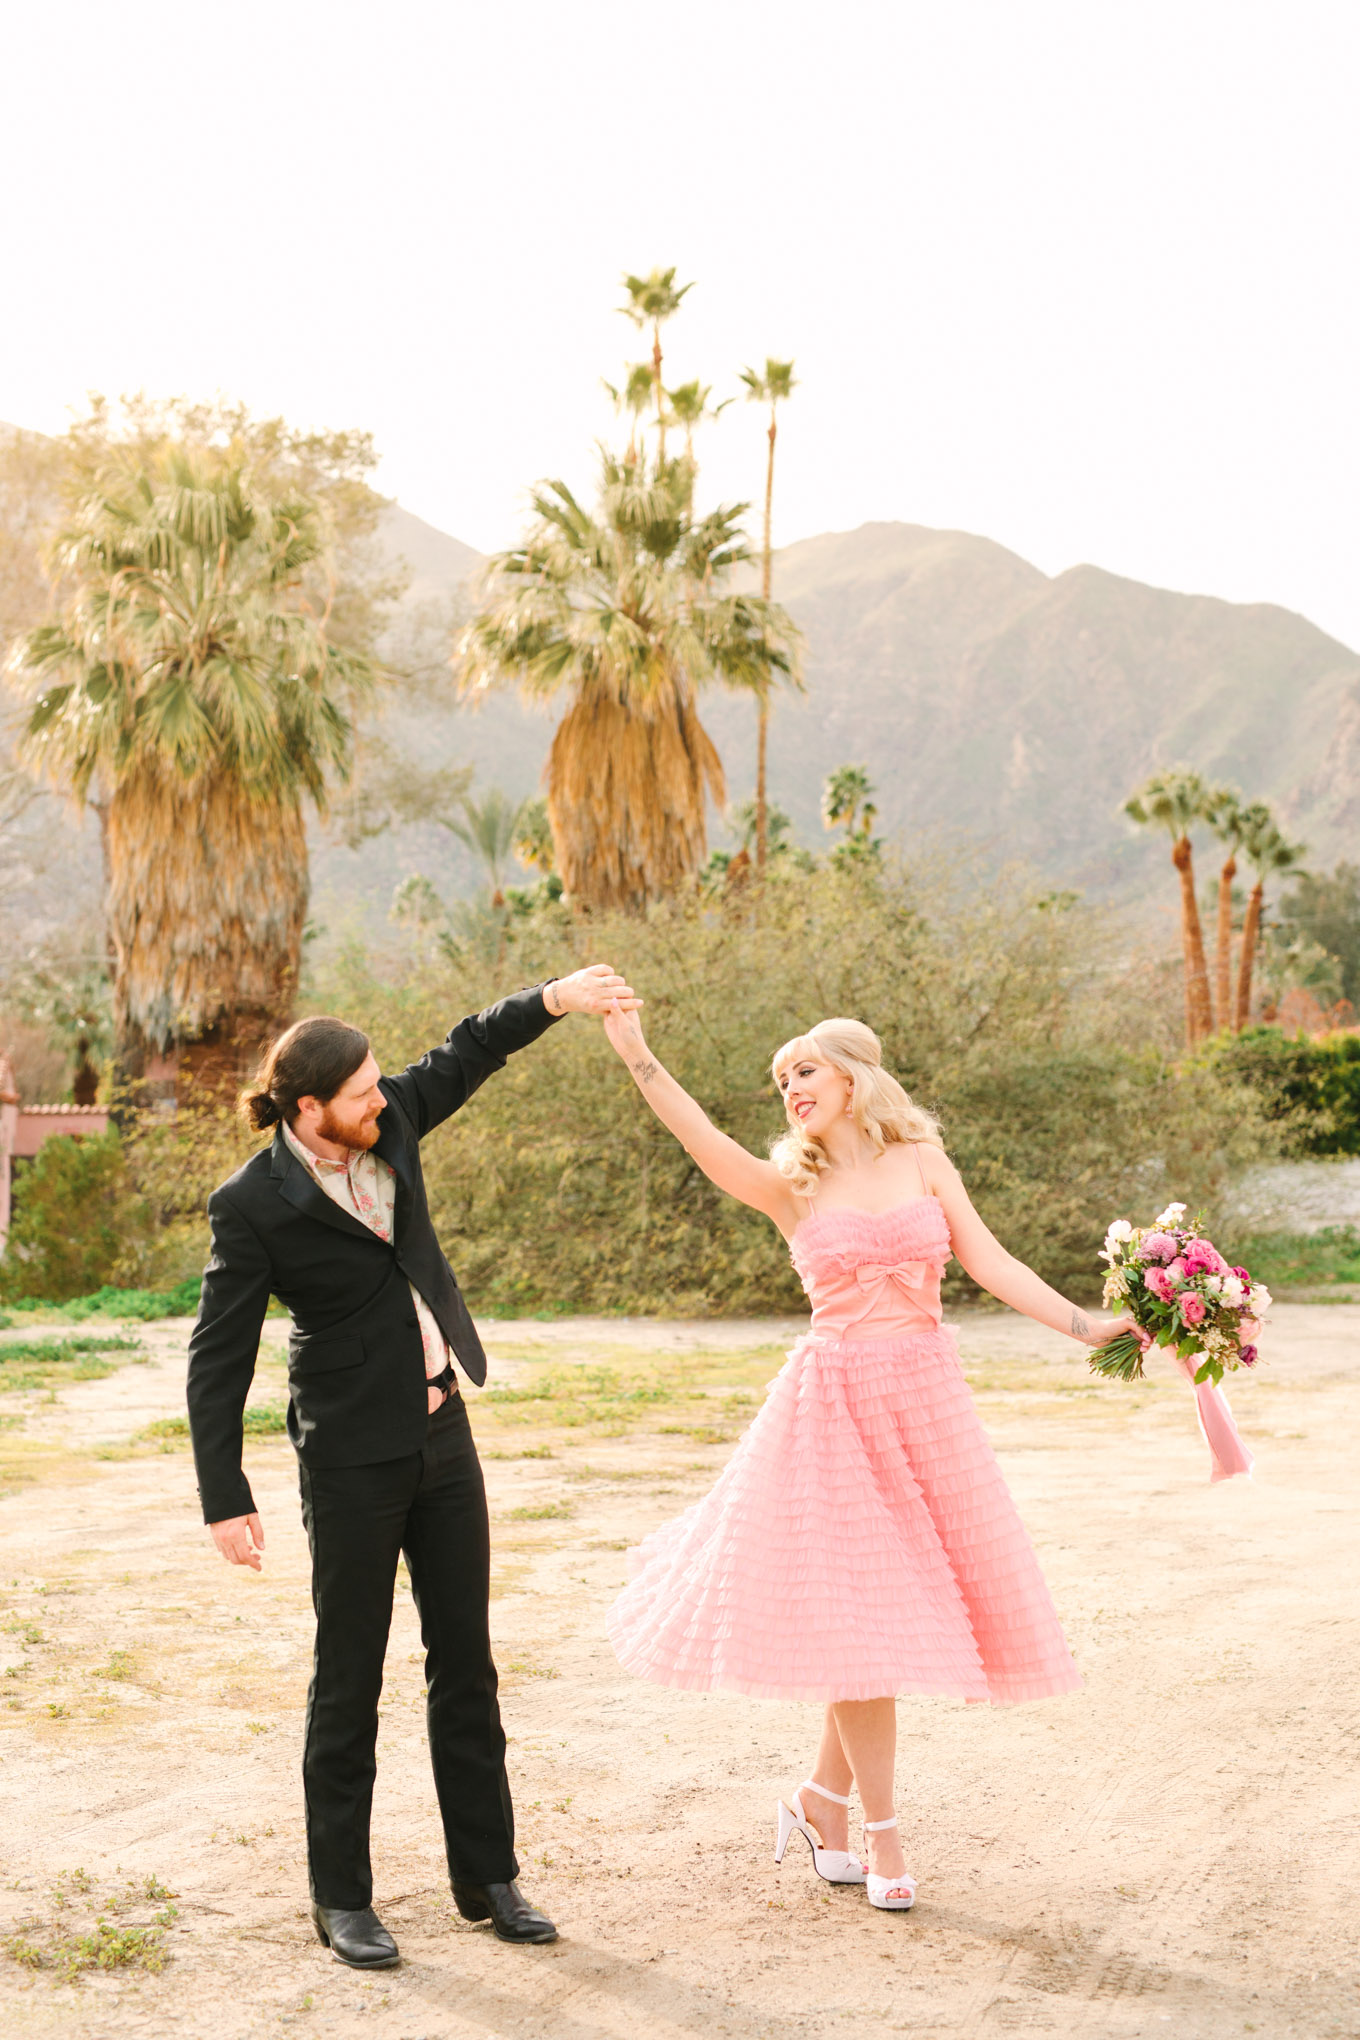 Retro couple twirling among palm trees. Modern vintage-inspired Palm Springs engagement session with a 1960s pink Cadillac, retro clothing, and flowers by Shindig Chic. | Colorful and elevated wedding inspiration for fun-loving couples in Southern California | #engagementsession #PalmSpringsengagement #vintageweddingdress #floralcar #pinkcar   Source: Mary Costa Photography | Los Angeles